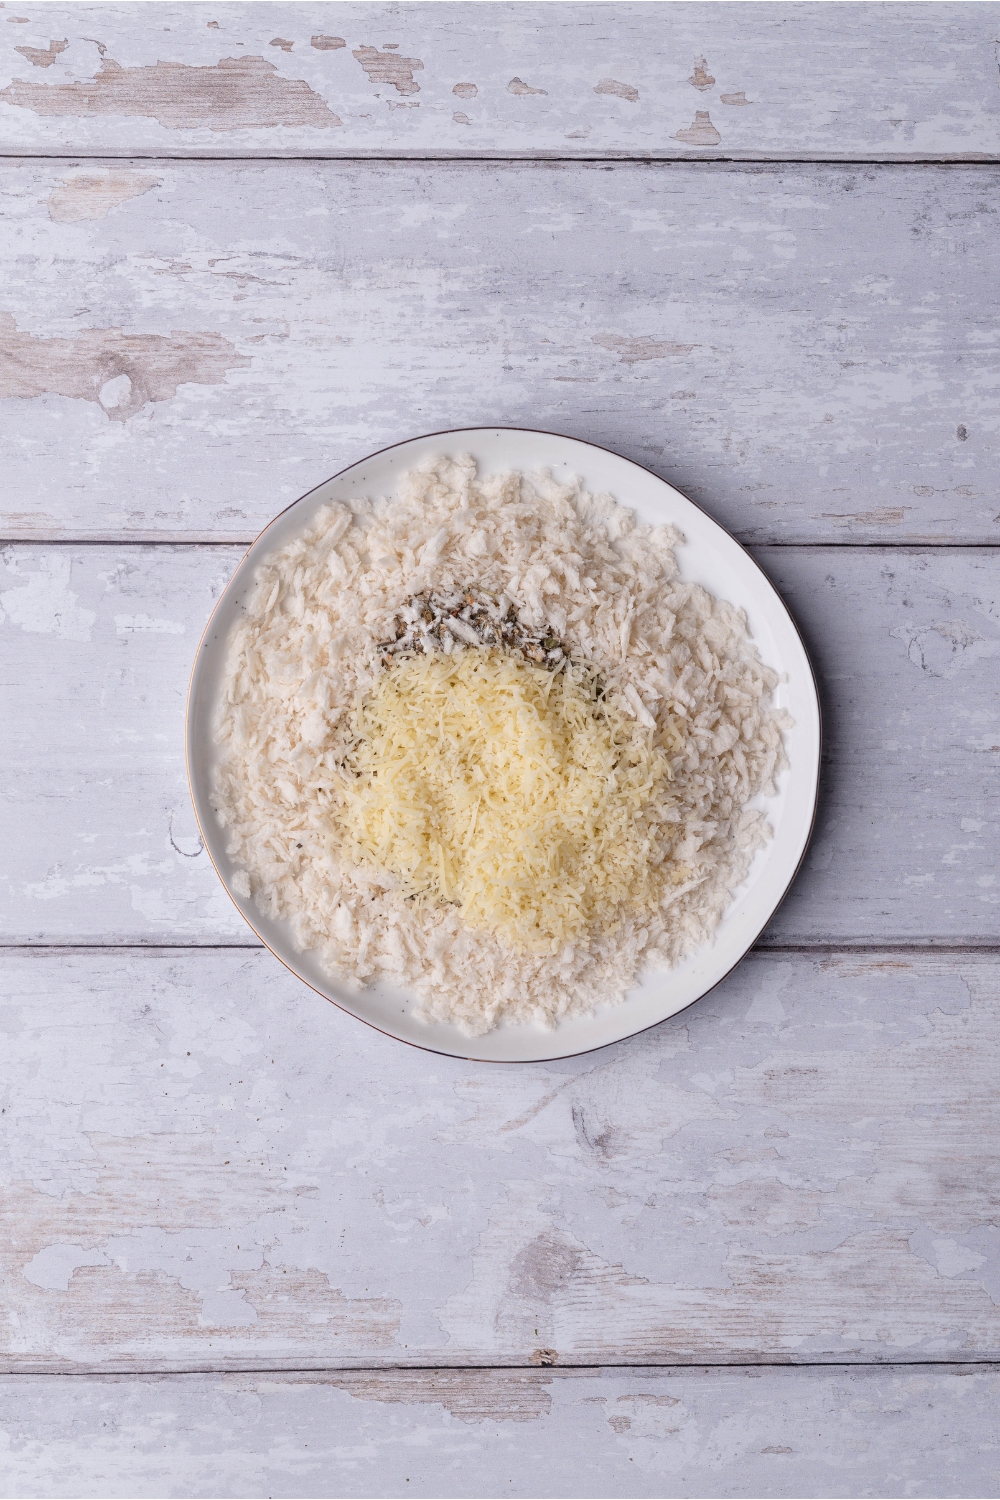 A white plate filled with bread crumbs, parmesan cheese, and spices. These ingredients have not been mixed together.